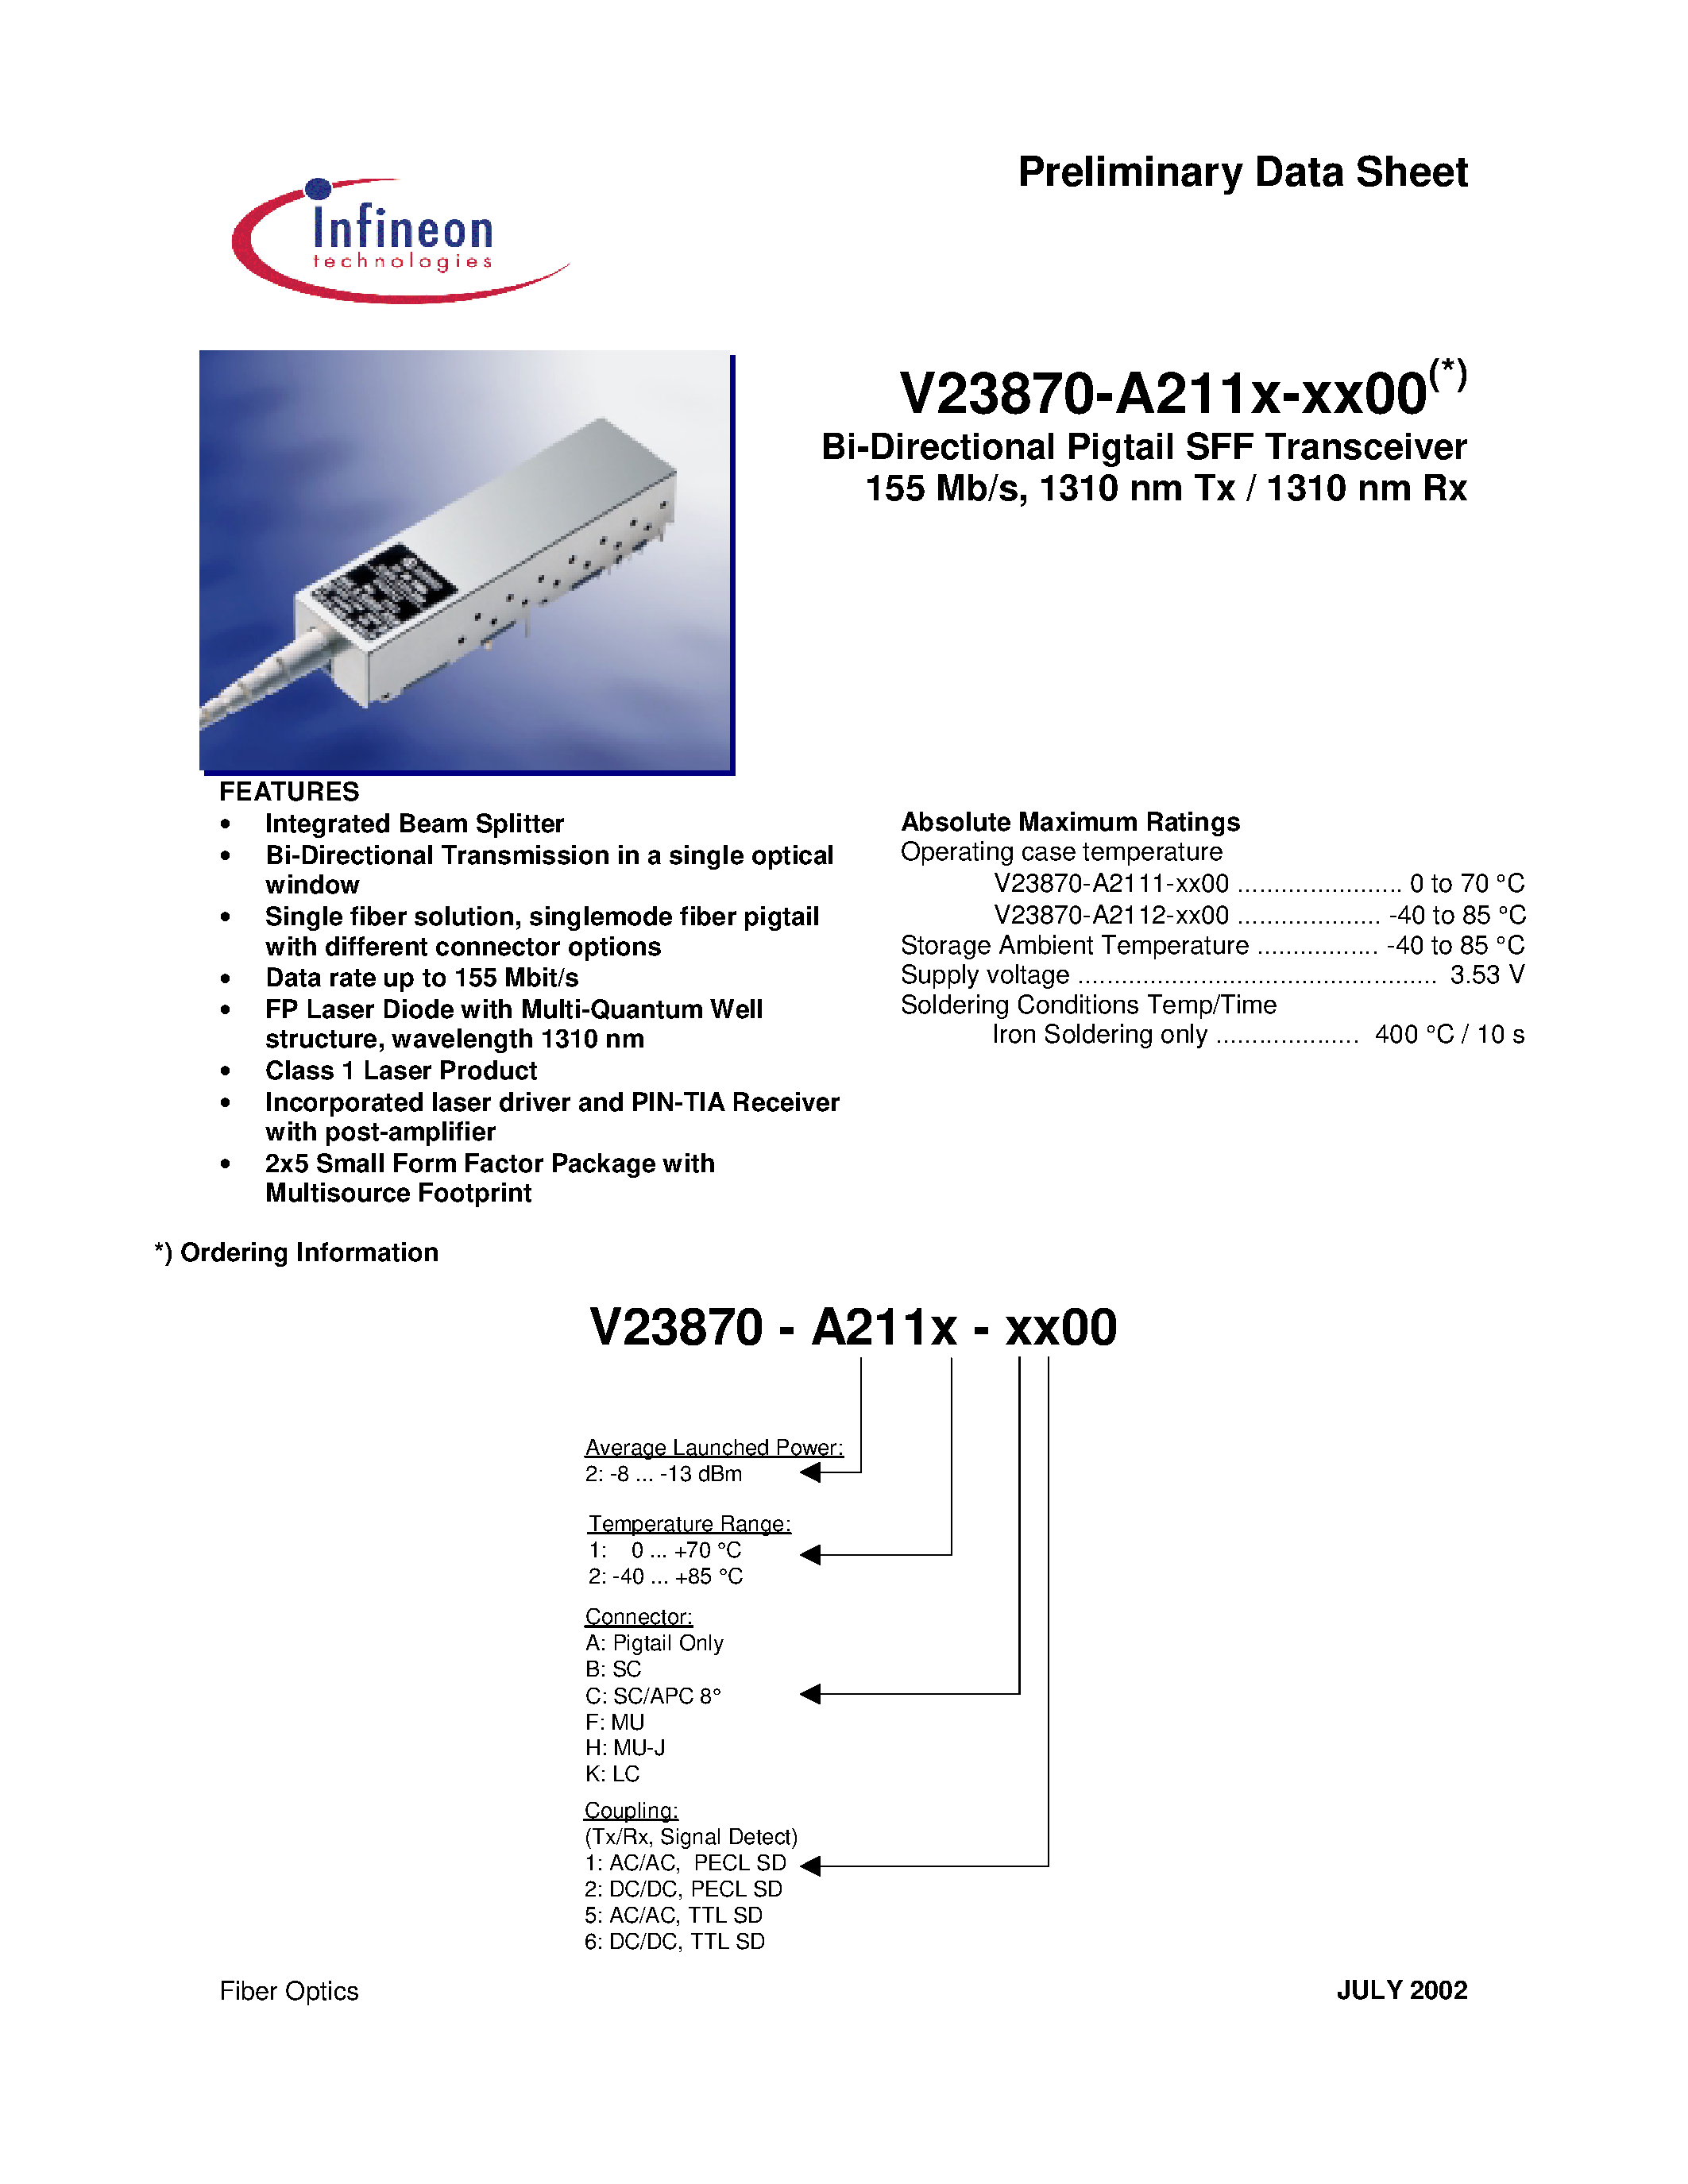 Datasheet V23870-A2112-K600 - Bi-Directional Pigtail SFF Transceiver 155 Mb/s/ 1310 nm Tx / 1310 nm Rx page 1